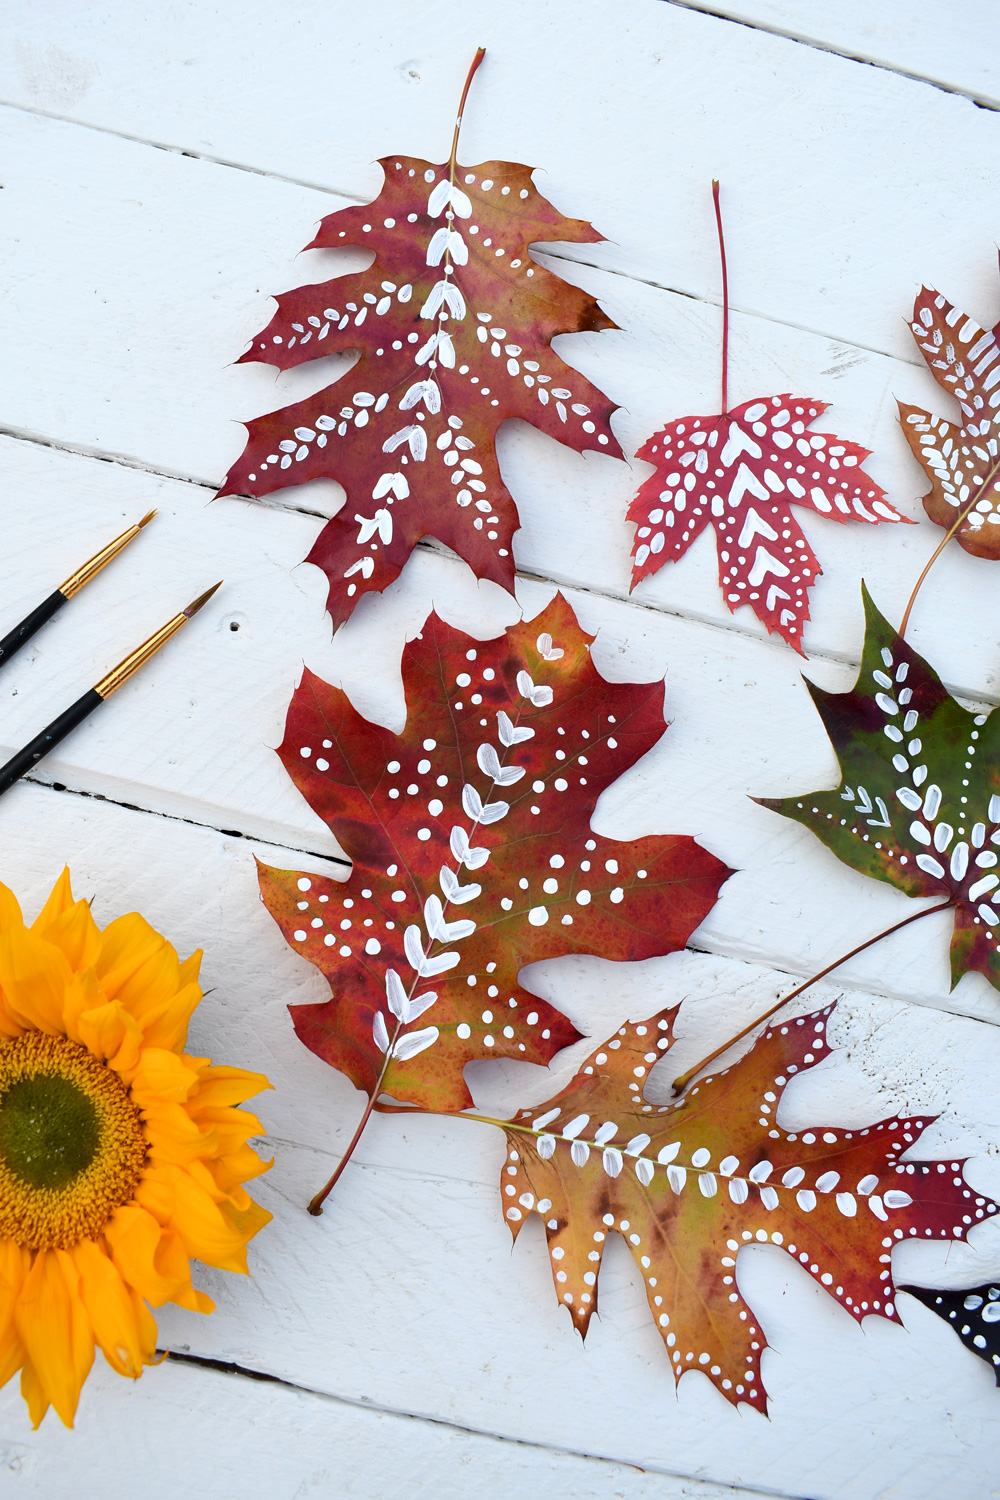 Painting real leaves with whimsical designs